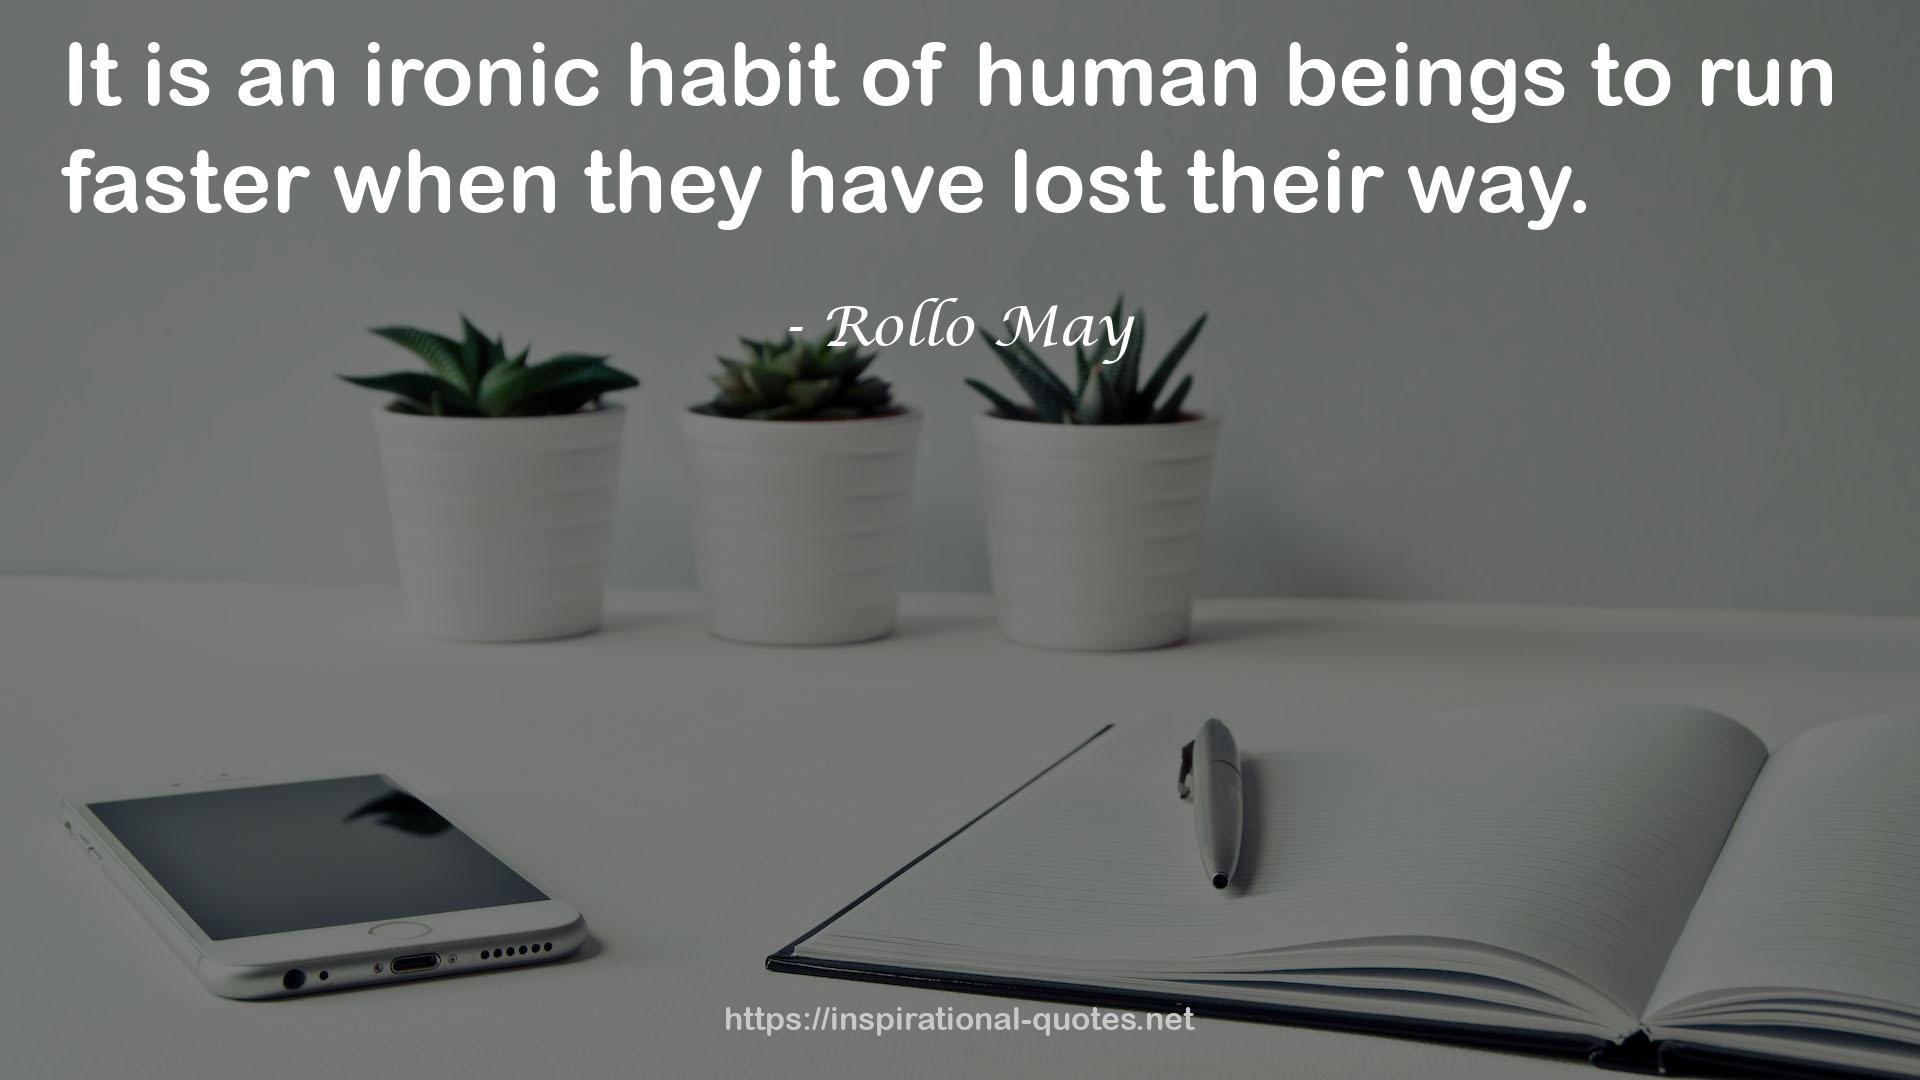 Rollo May QUOTES